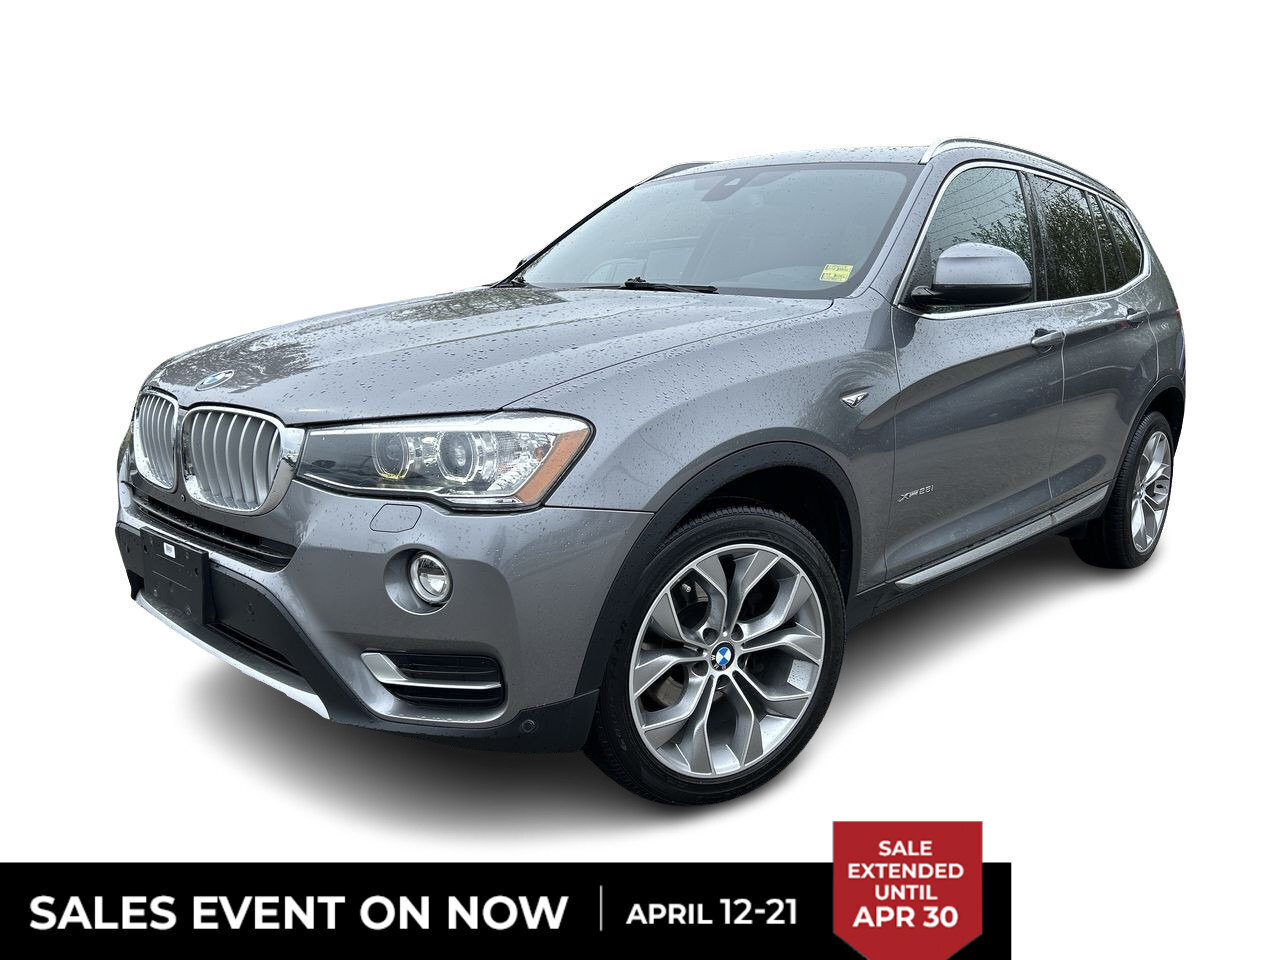 2016 BMW X3 XDrive28i |Safety check|Local|AWD|1 owner|